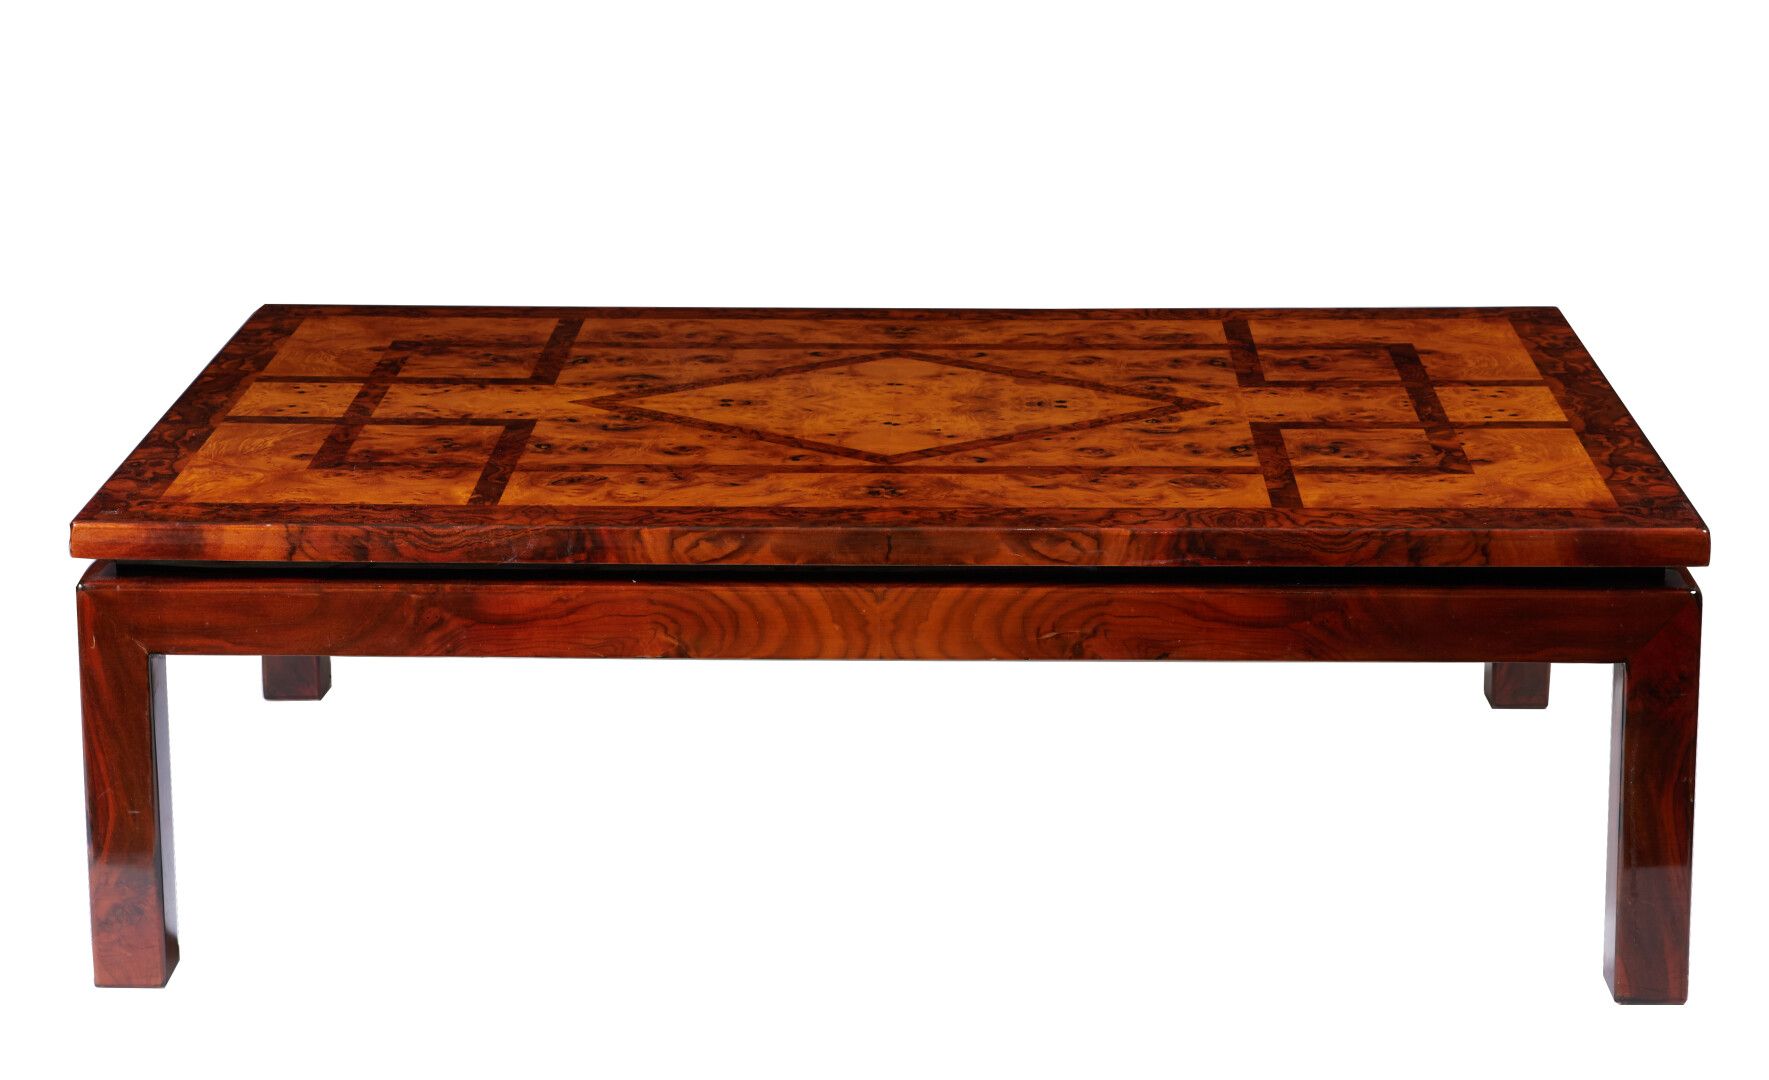 Null Rectangular coffee table in burr walnut veneer inlaid with large fillets.

&hellip;